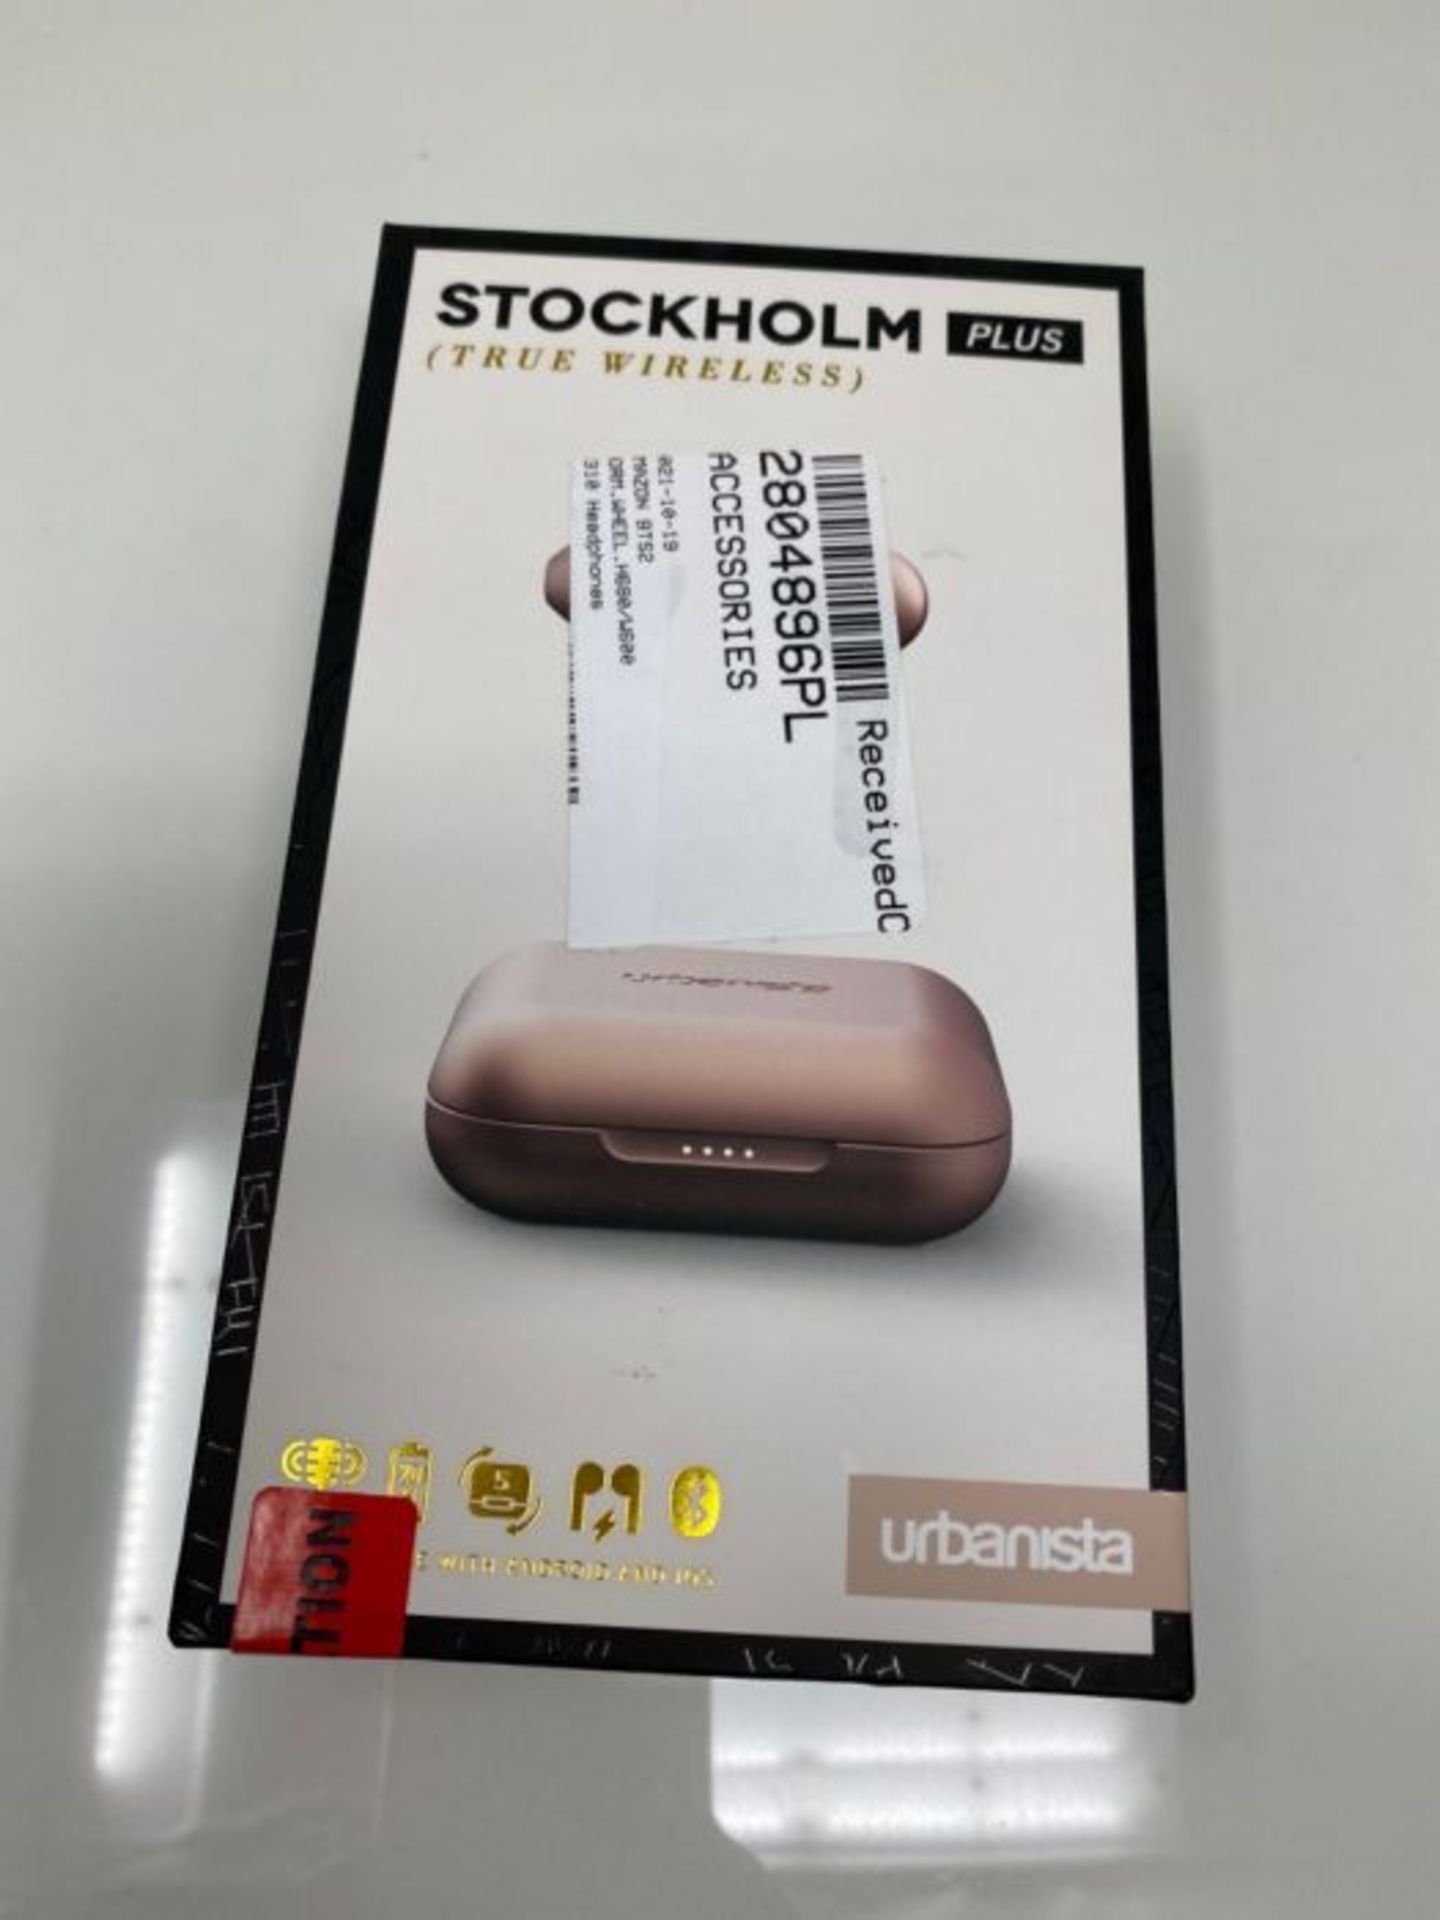 Urbanista Stockholm Plus True Wireless Earbuds - Over 20 Hours Playtime, IPX4 Waterpro - Image 2 of 3